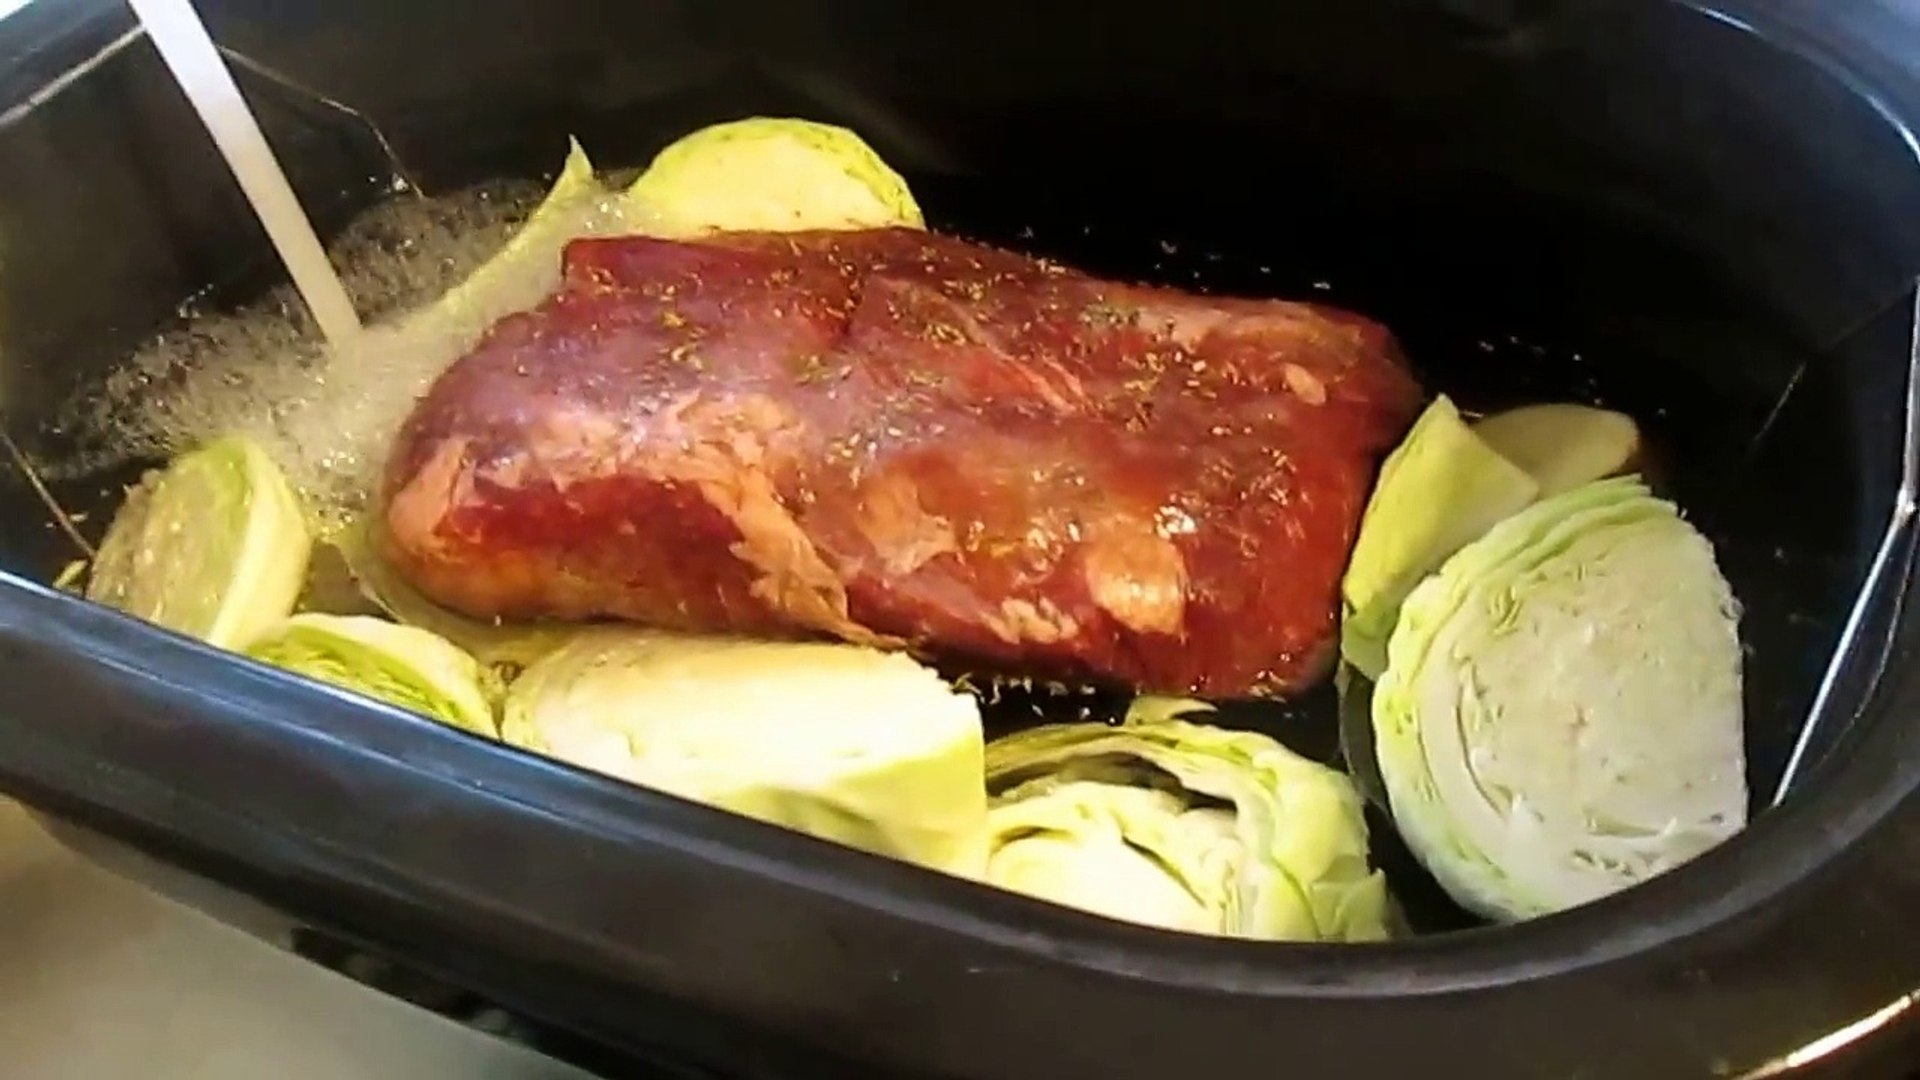 How to make corned beef brisket and Cabbage in your Rival roaster oven -  video Dailymotion